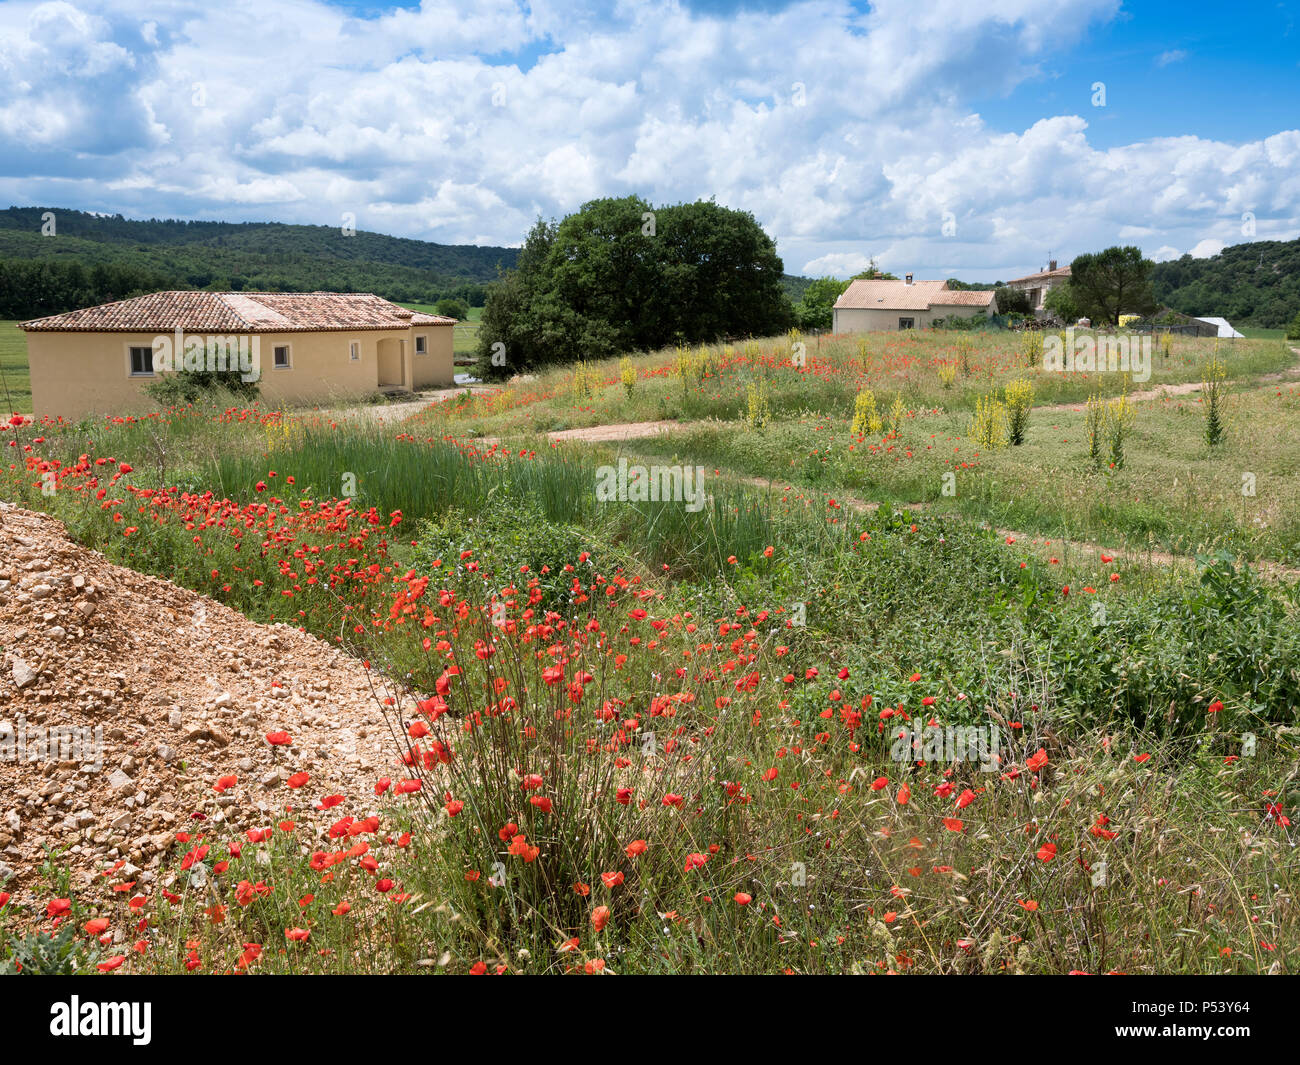 red poppy flowers and old provence house in rural south france landscape Stock Photo